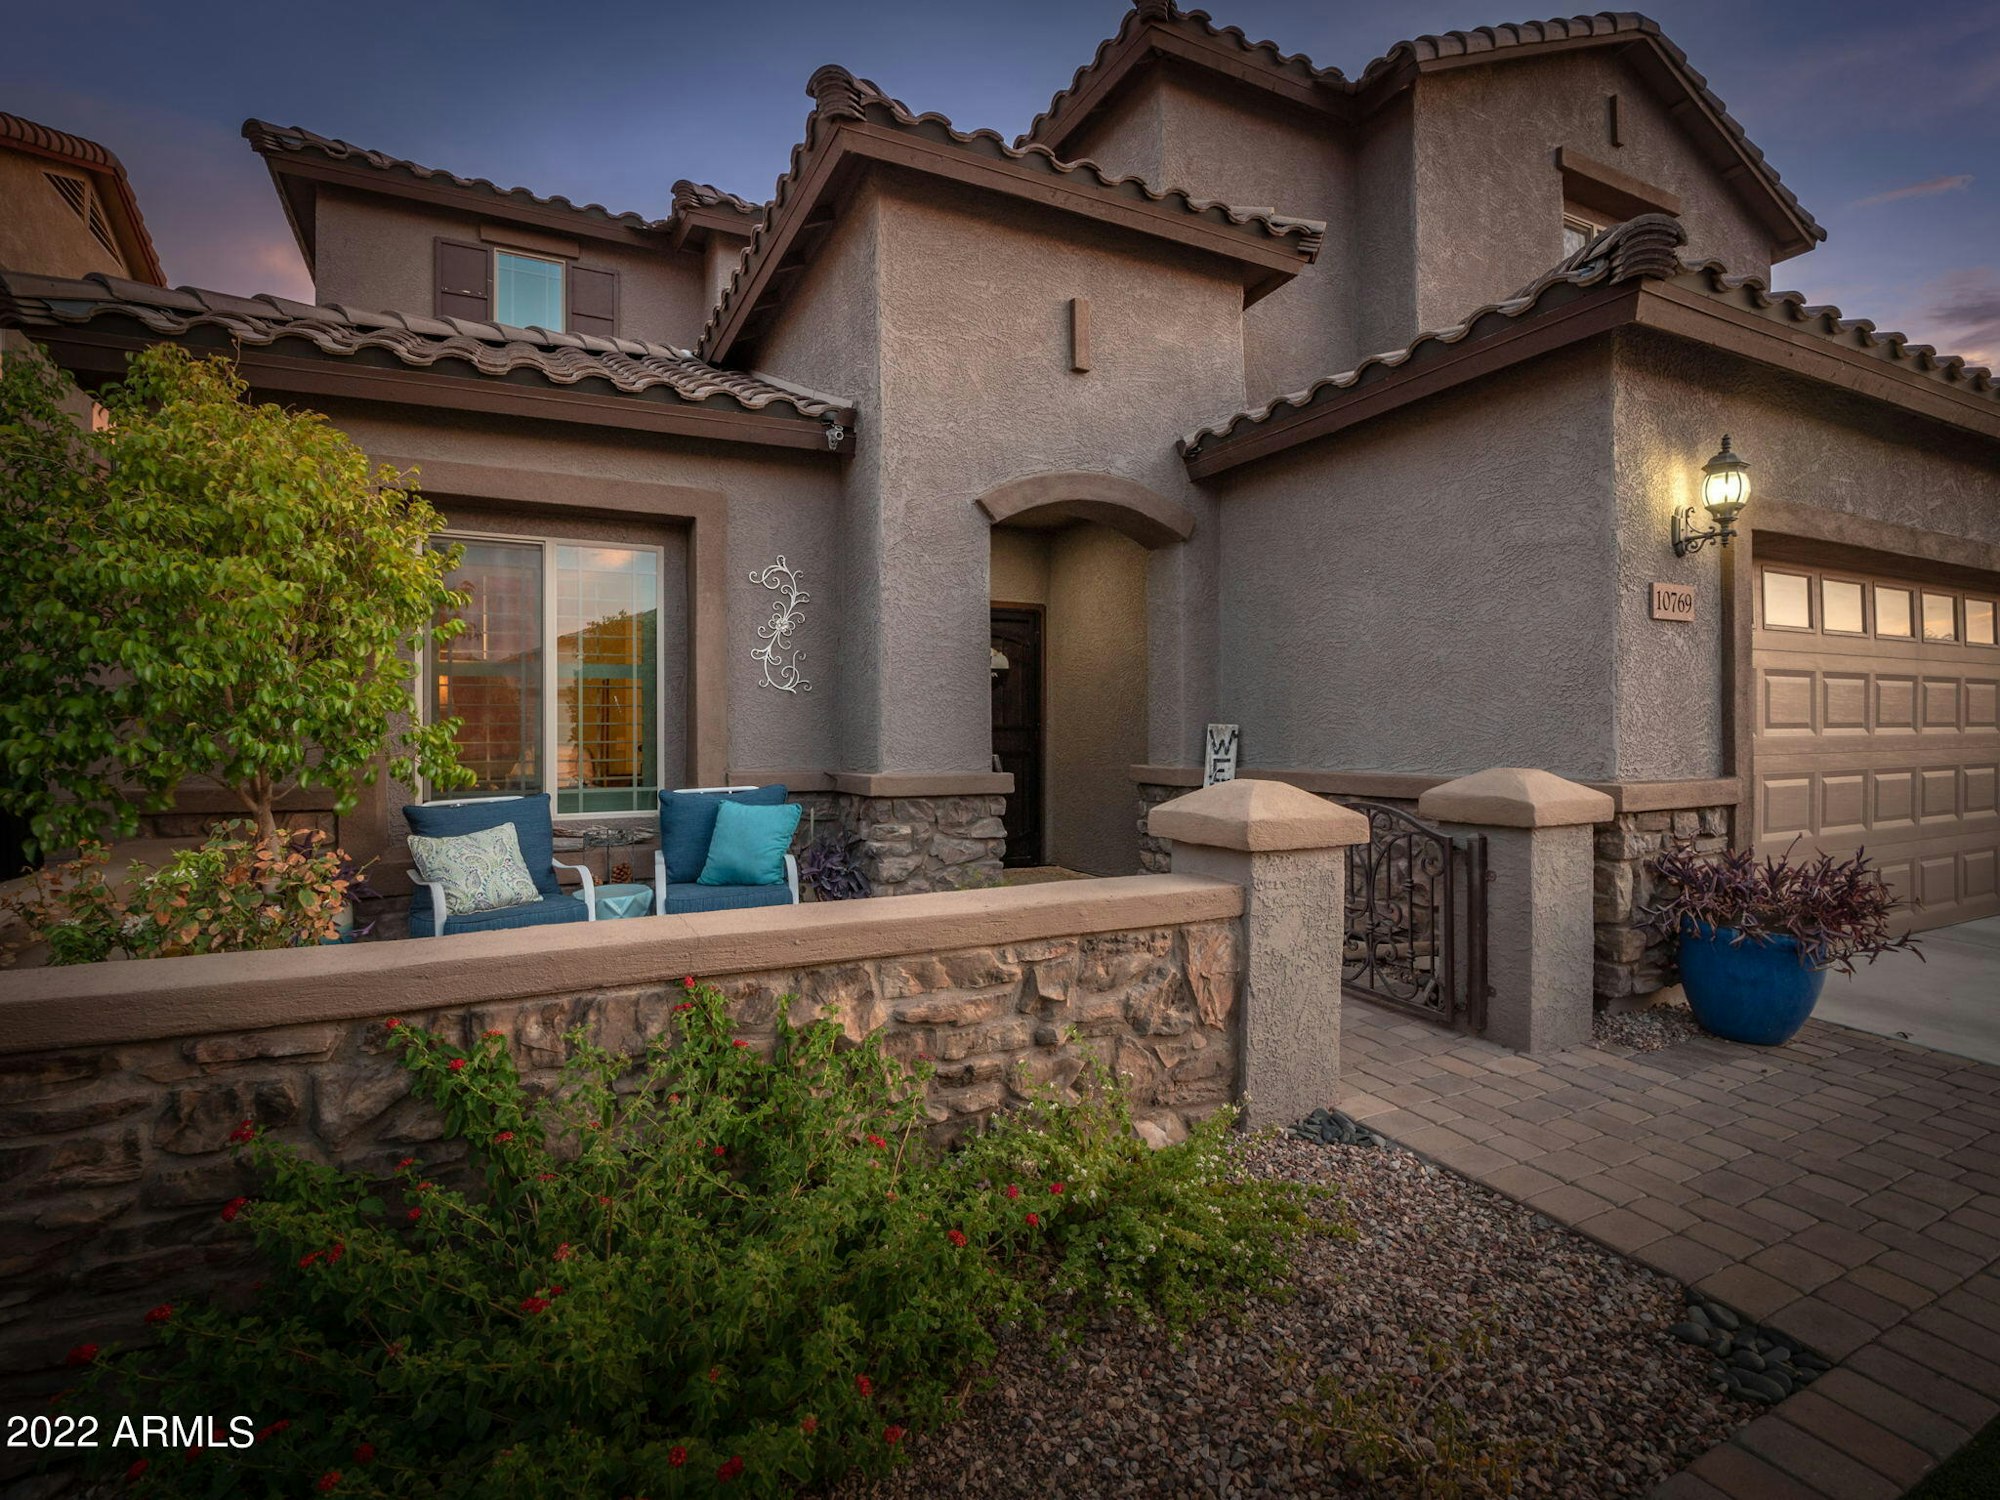 Photo 1 of 93 - 10769 W Yearling Rd, Peoria, AZ 85383